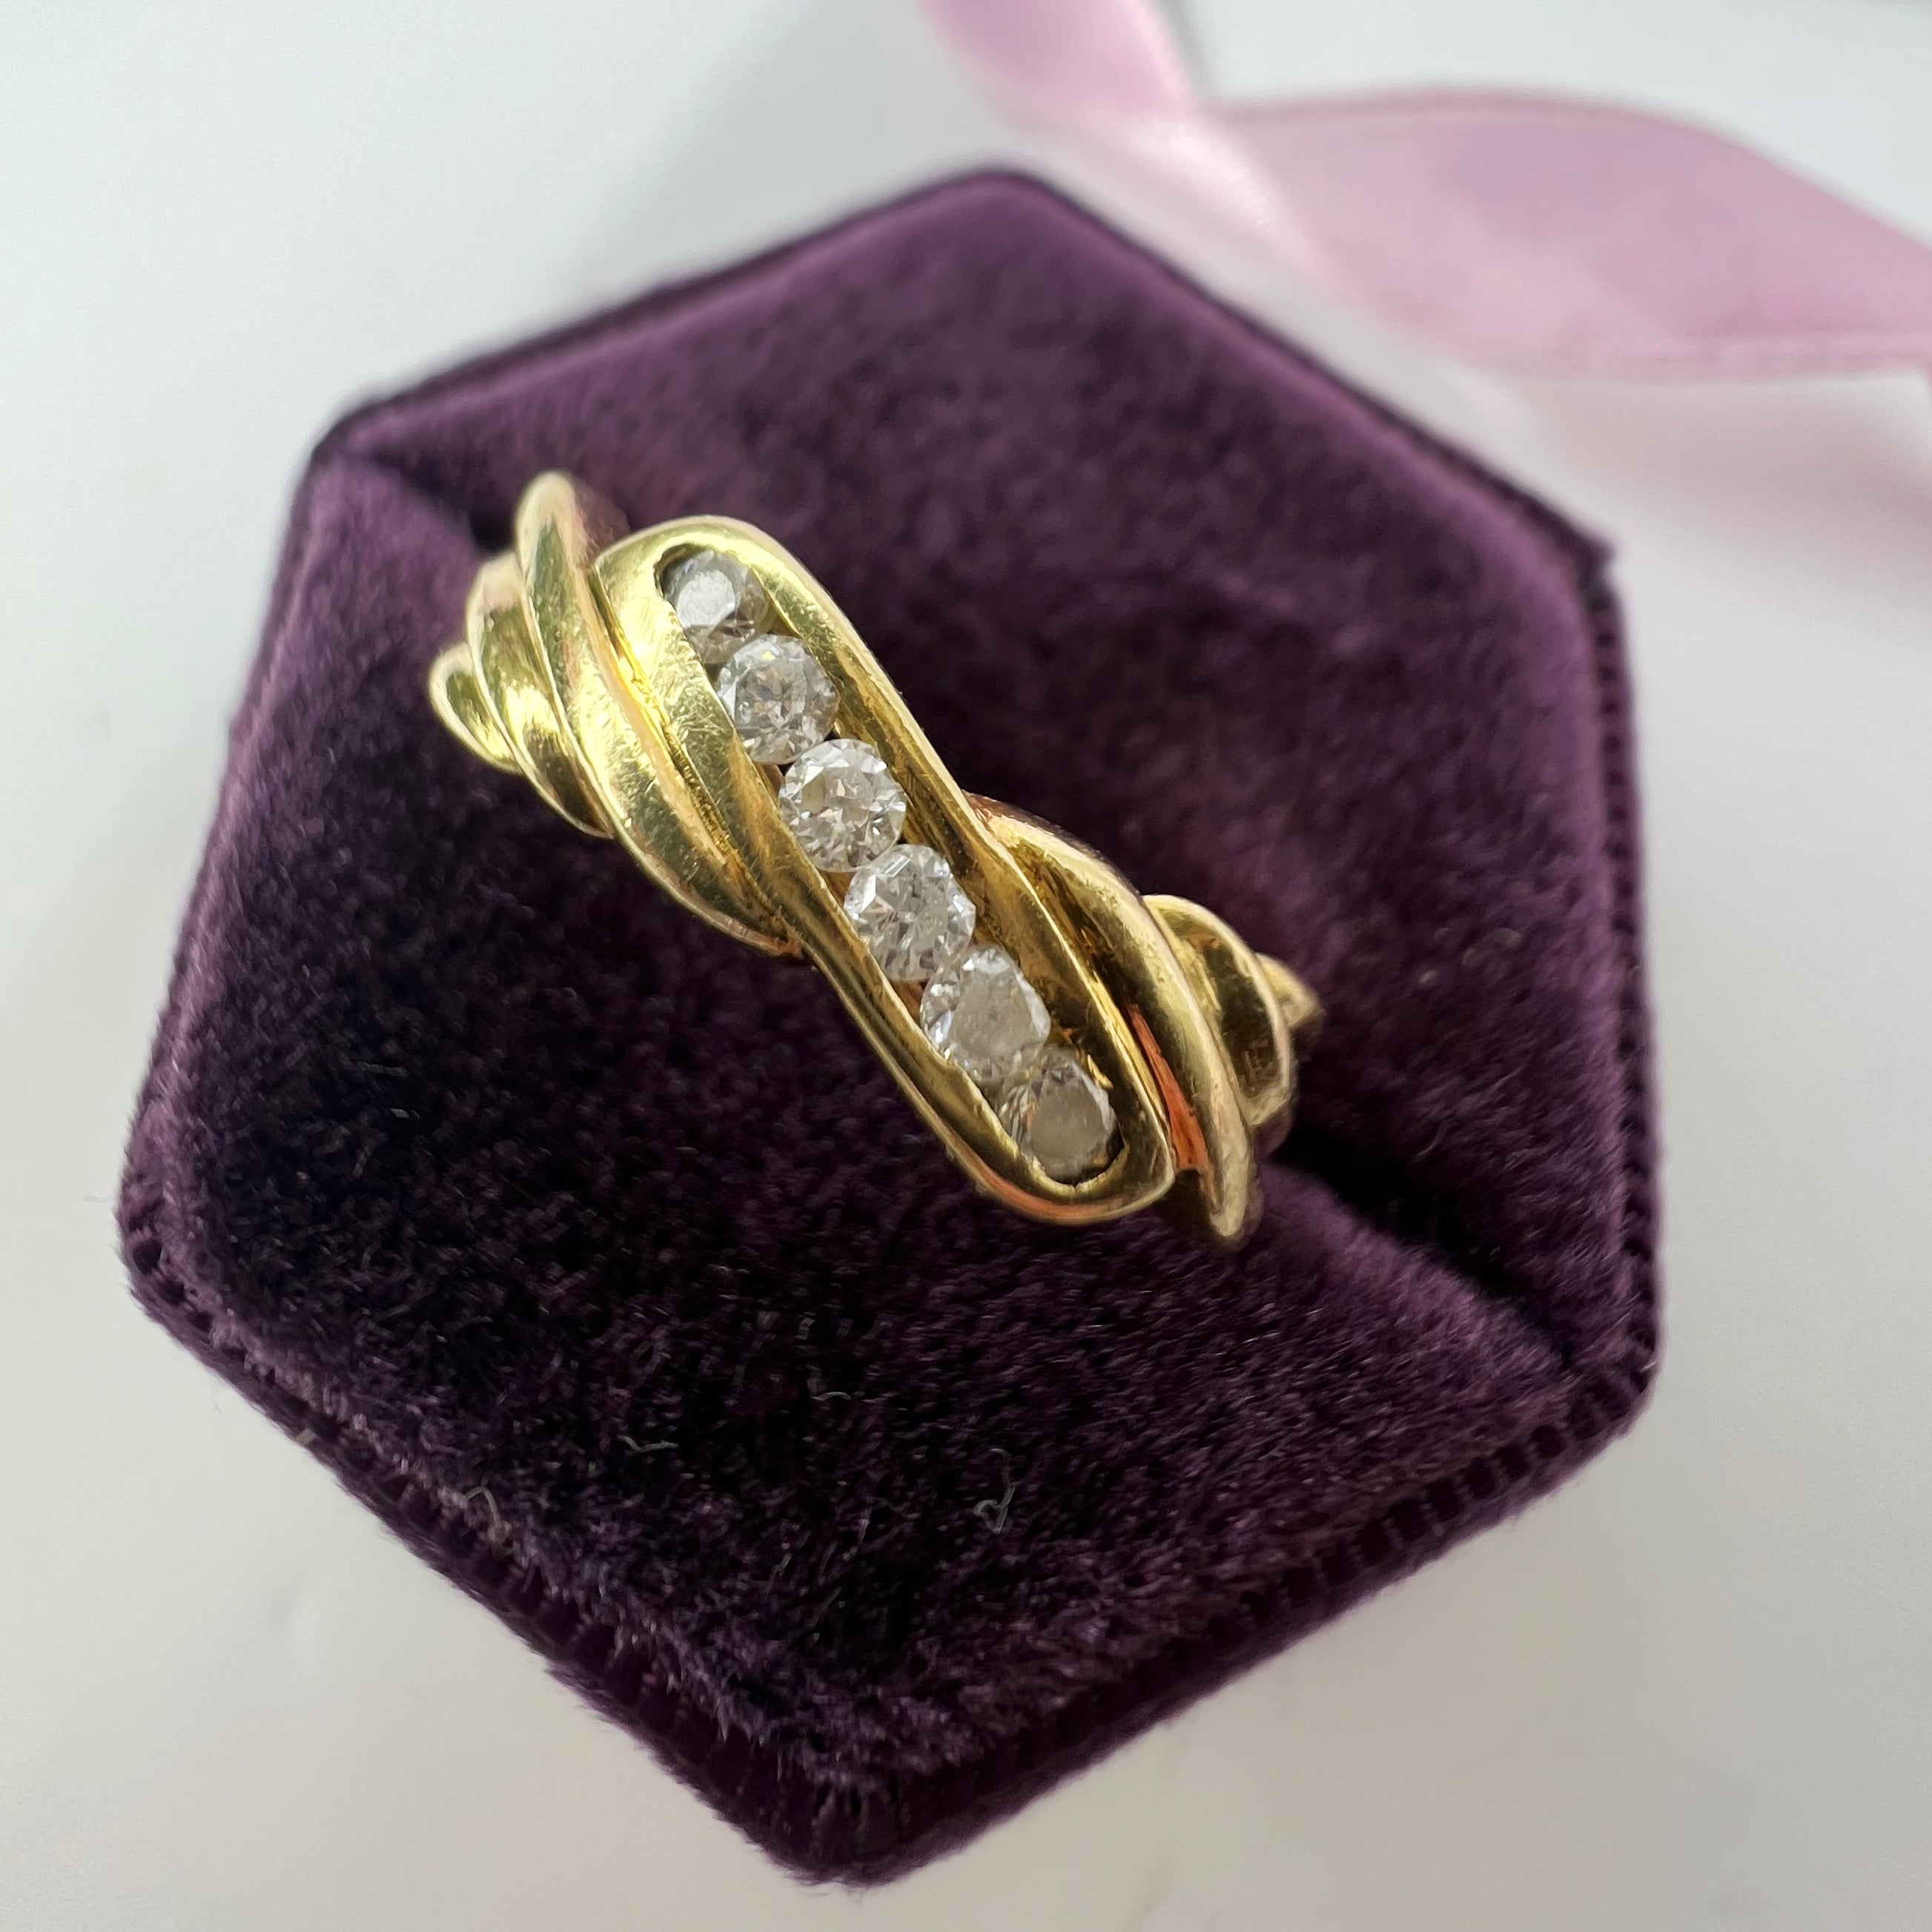 Vintage Gold and 0.15ct Diamond Ring